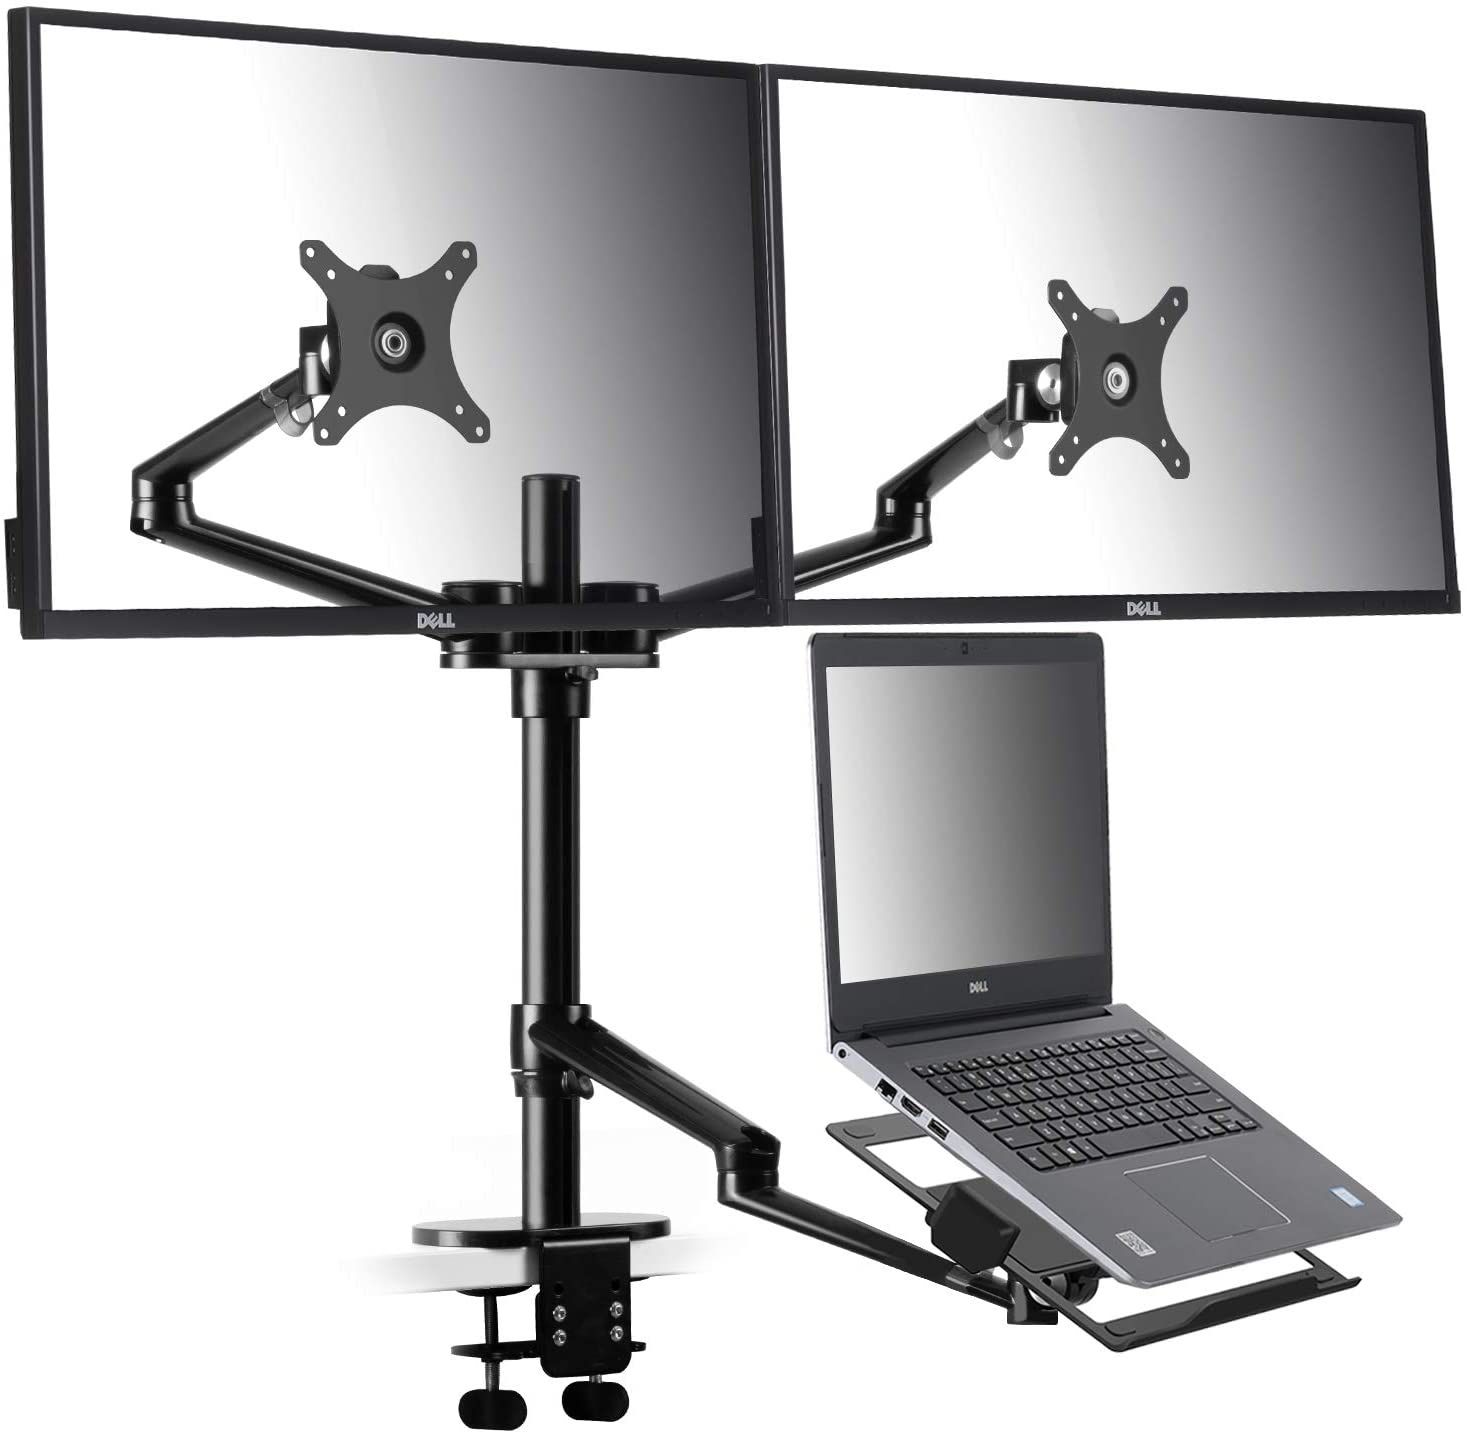 Dual monitor and laptop mount. 3 arm system